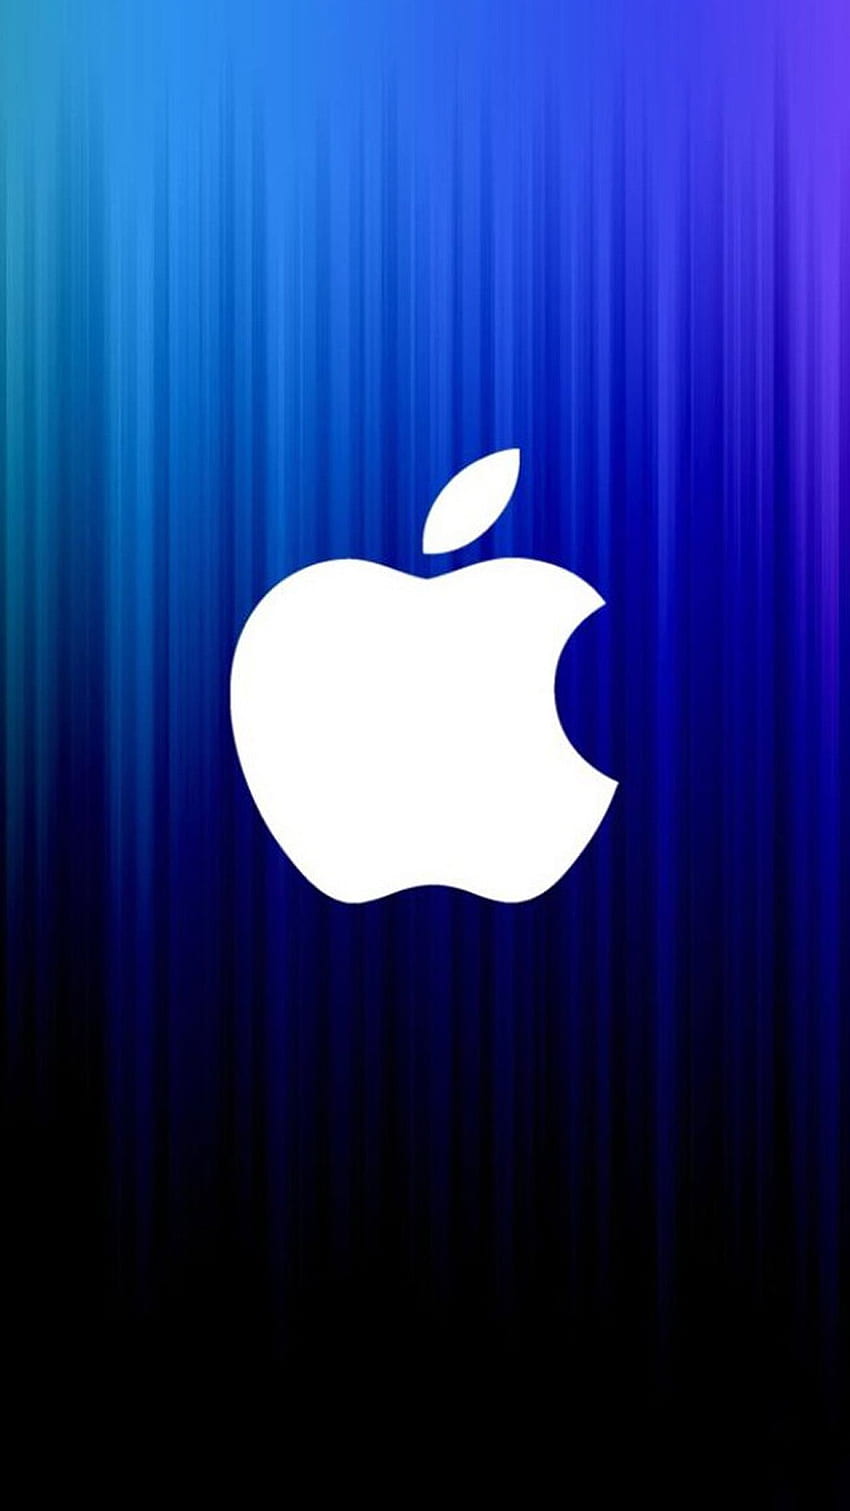 Apple logo HD wallpapers, backgrounds